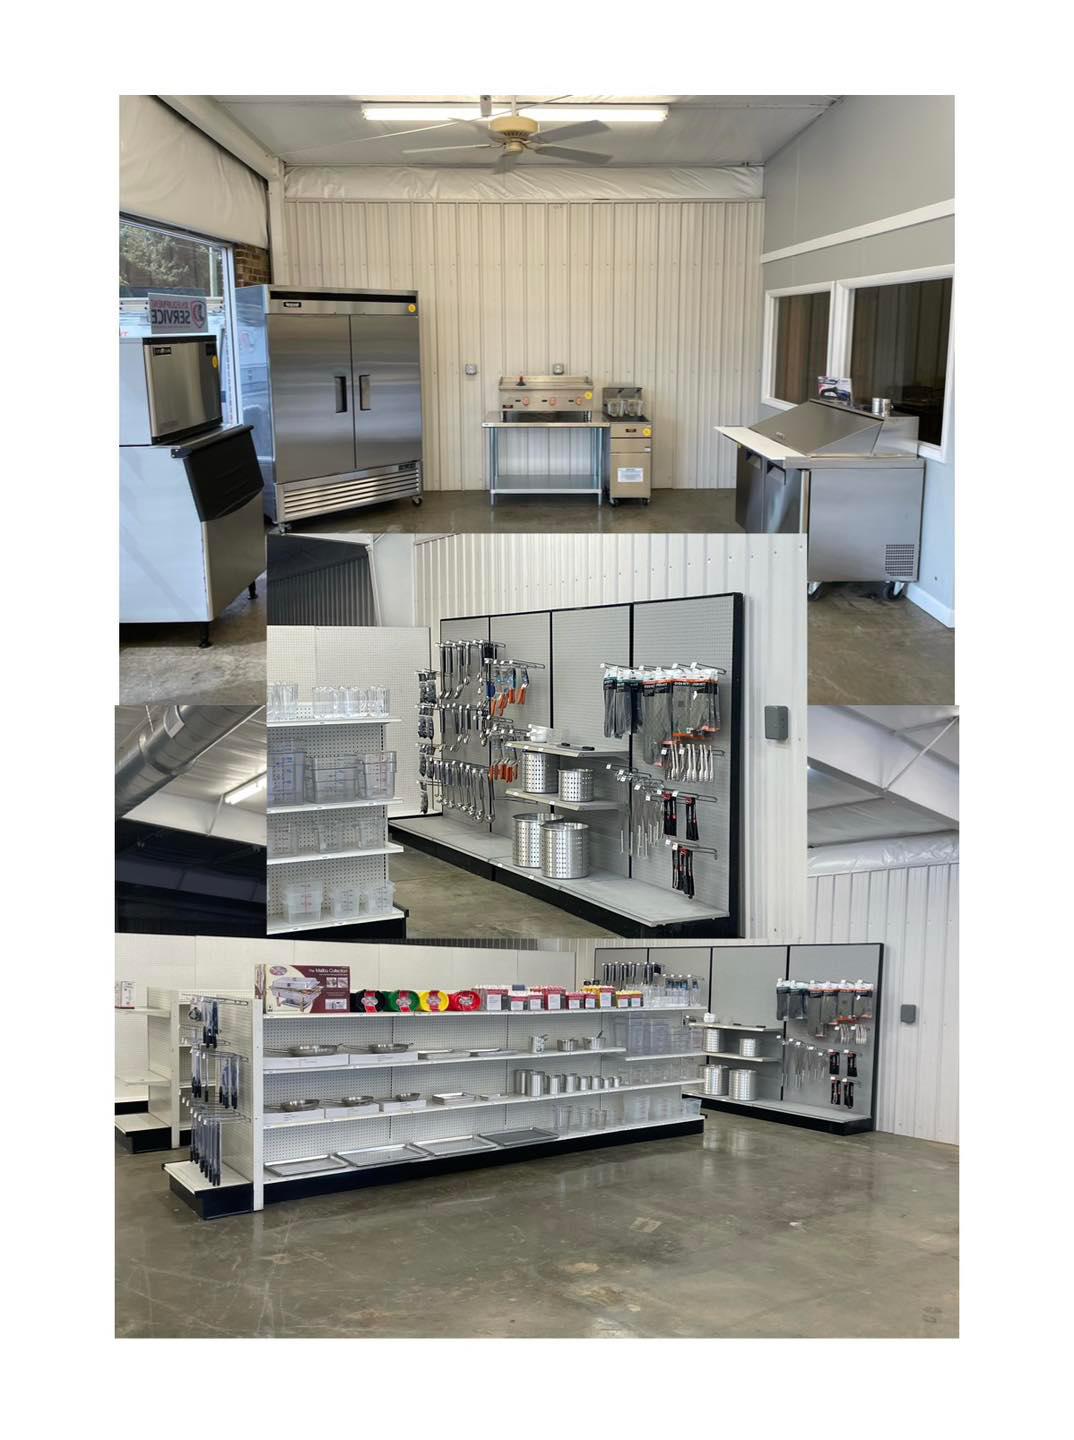 ALl Equipment for your Commercial Kitchen